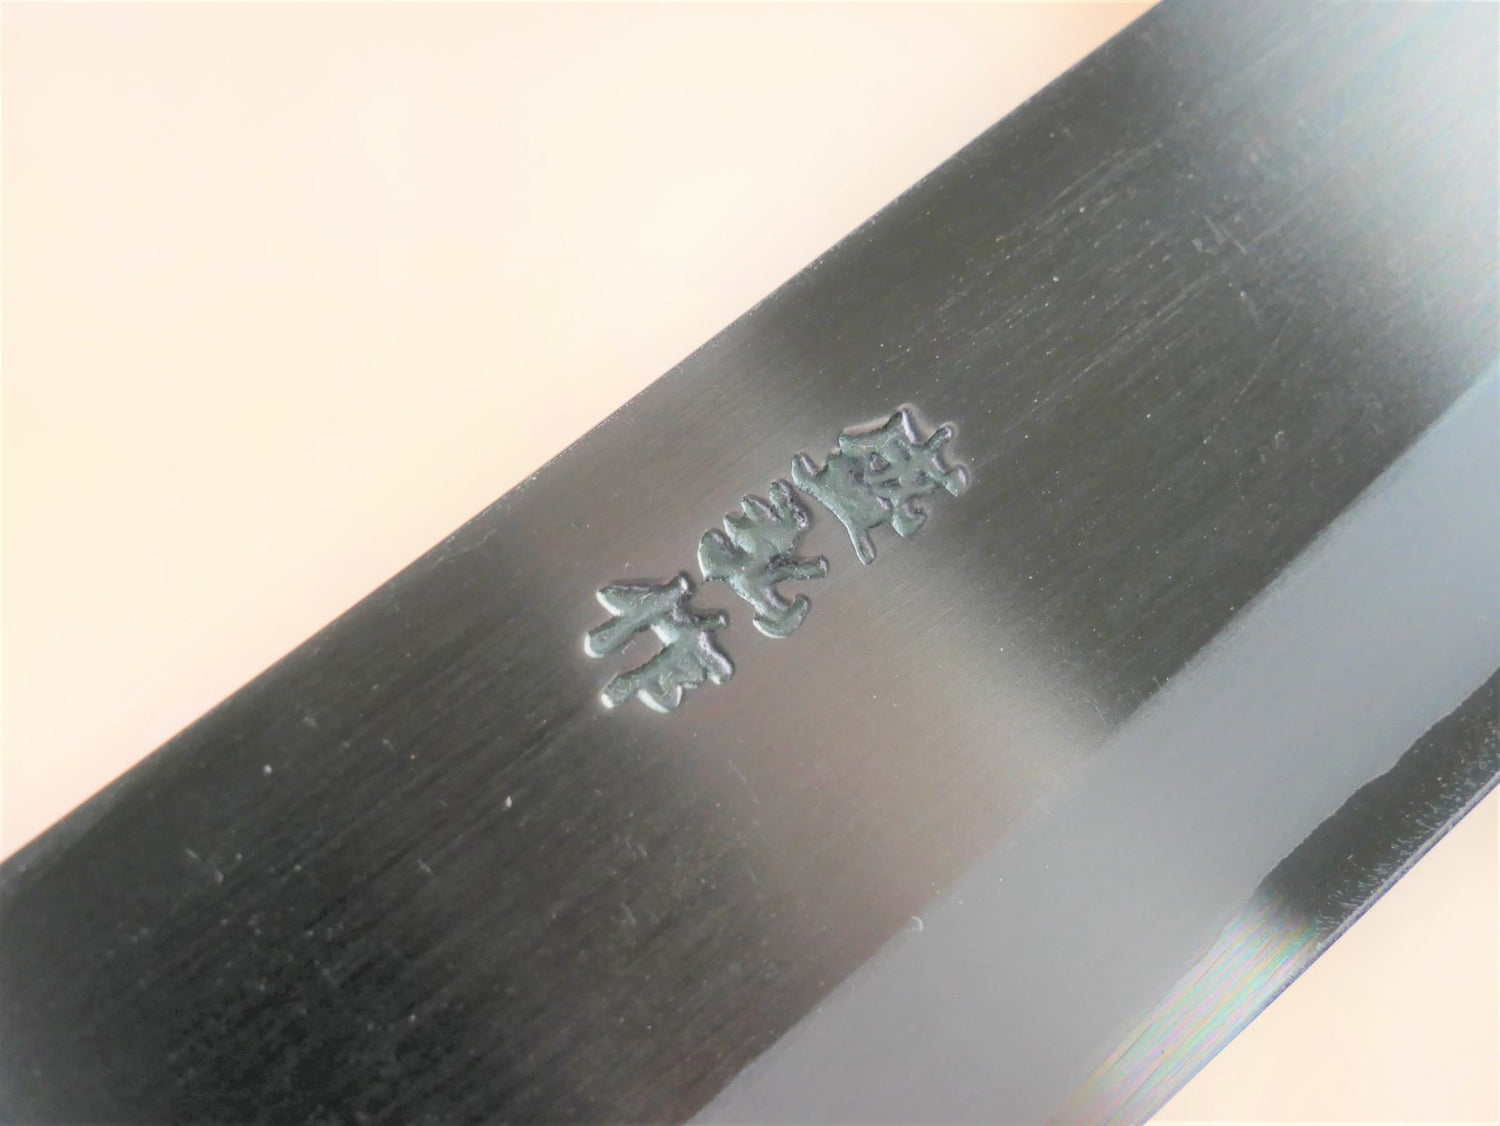 Maker's mark on blade face of 165mm Aogami No.2 special Santoku forged by Yasuaki Taira